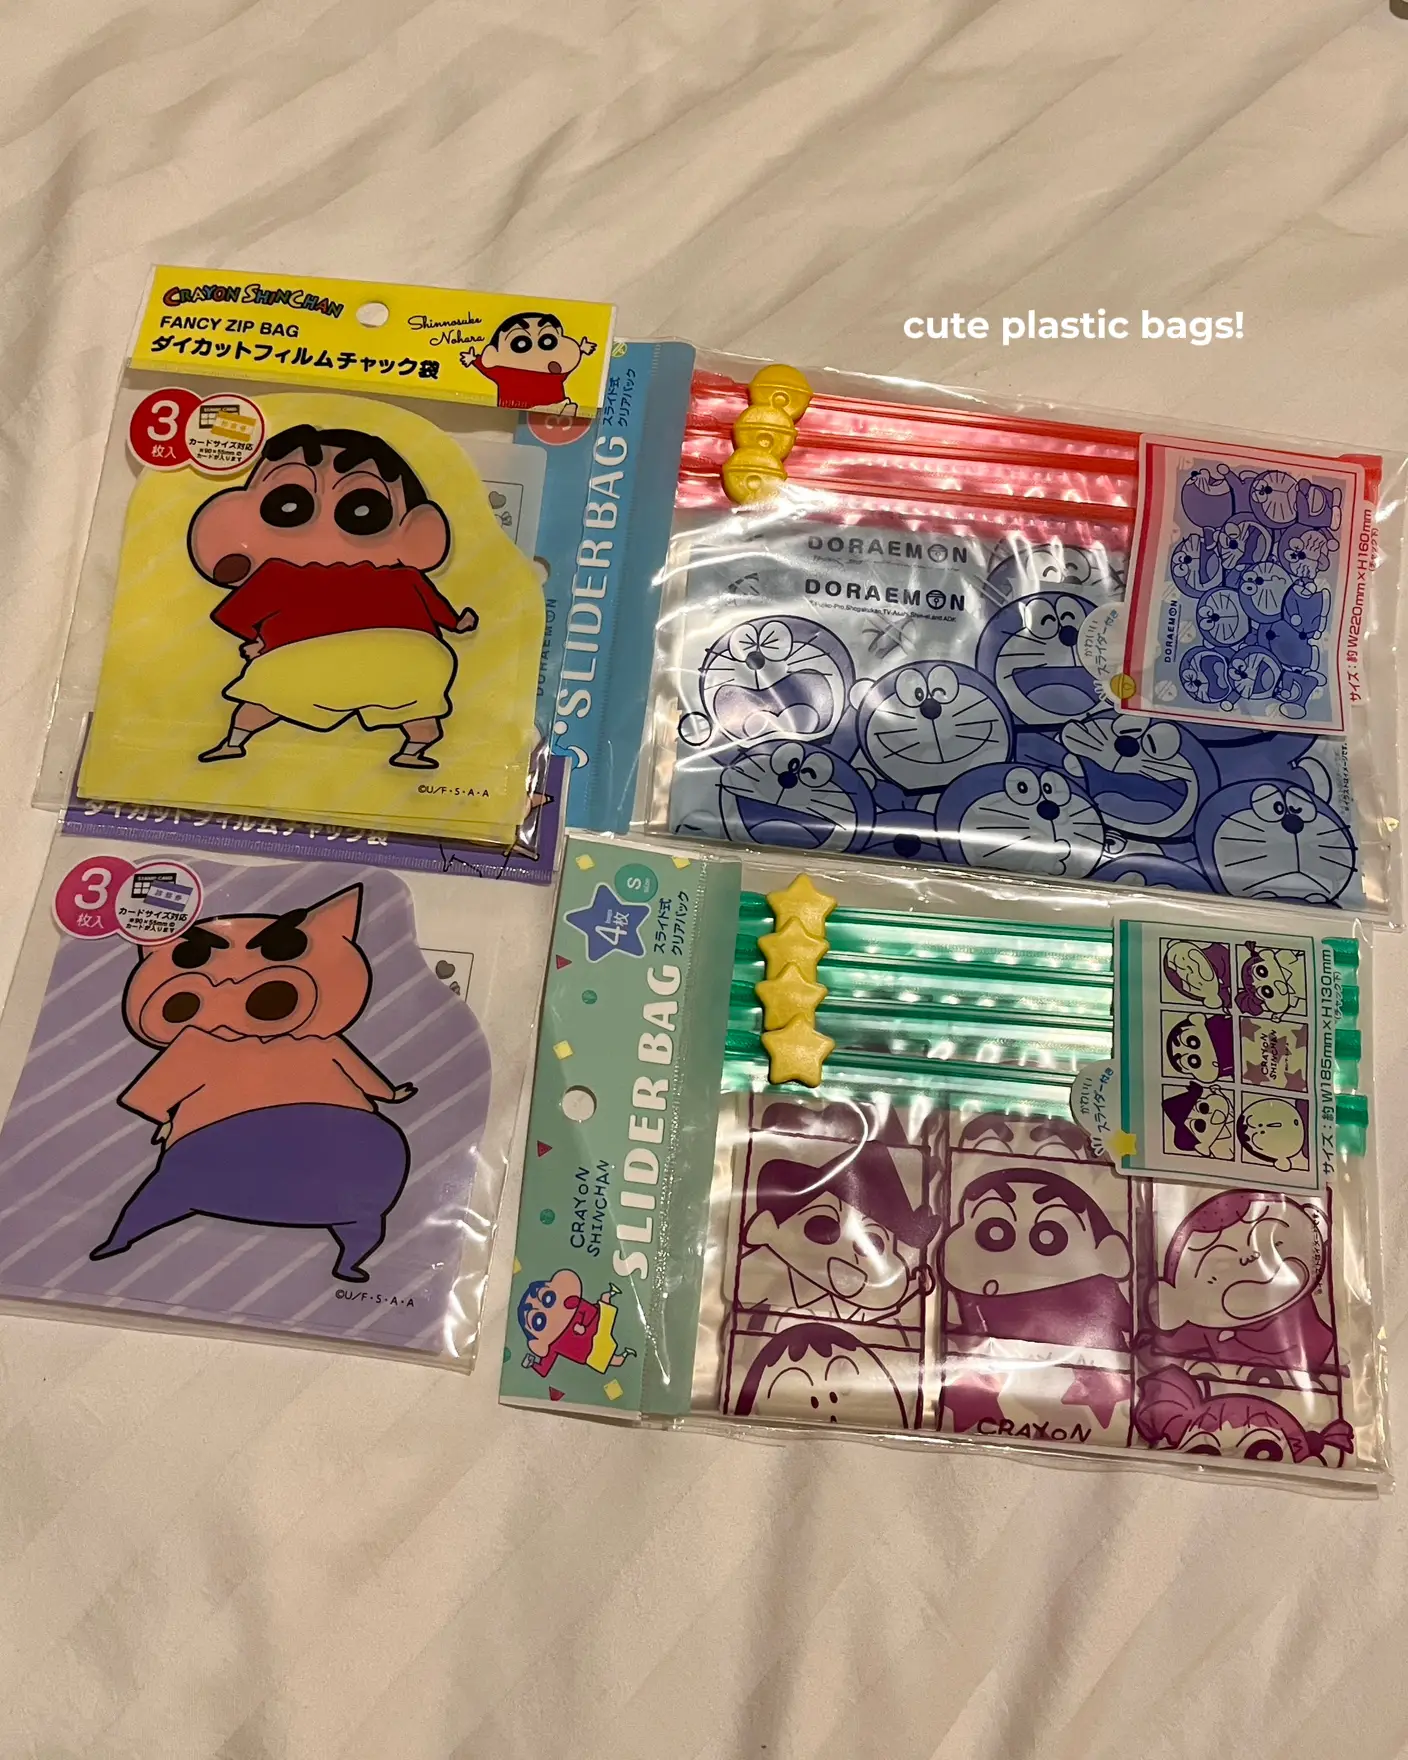 Daiso 100 Yen Haul: Top 5 Crazy Quality Japanese Stationery on a